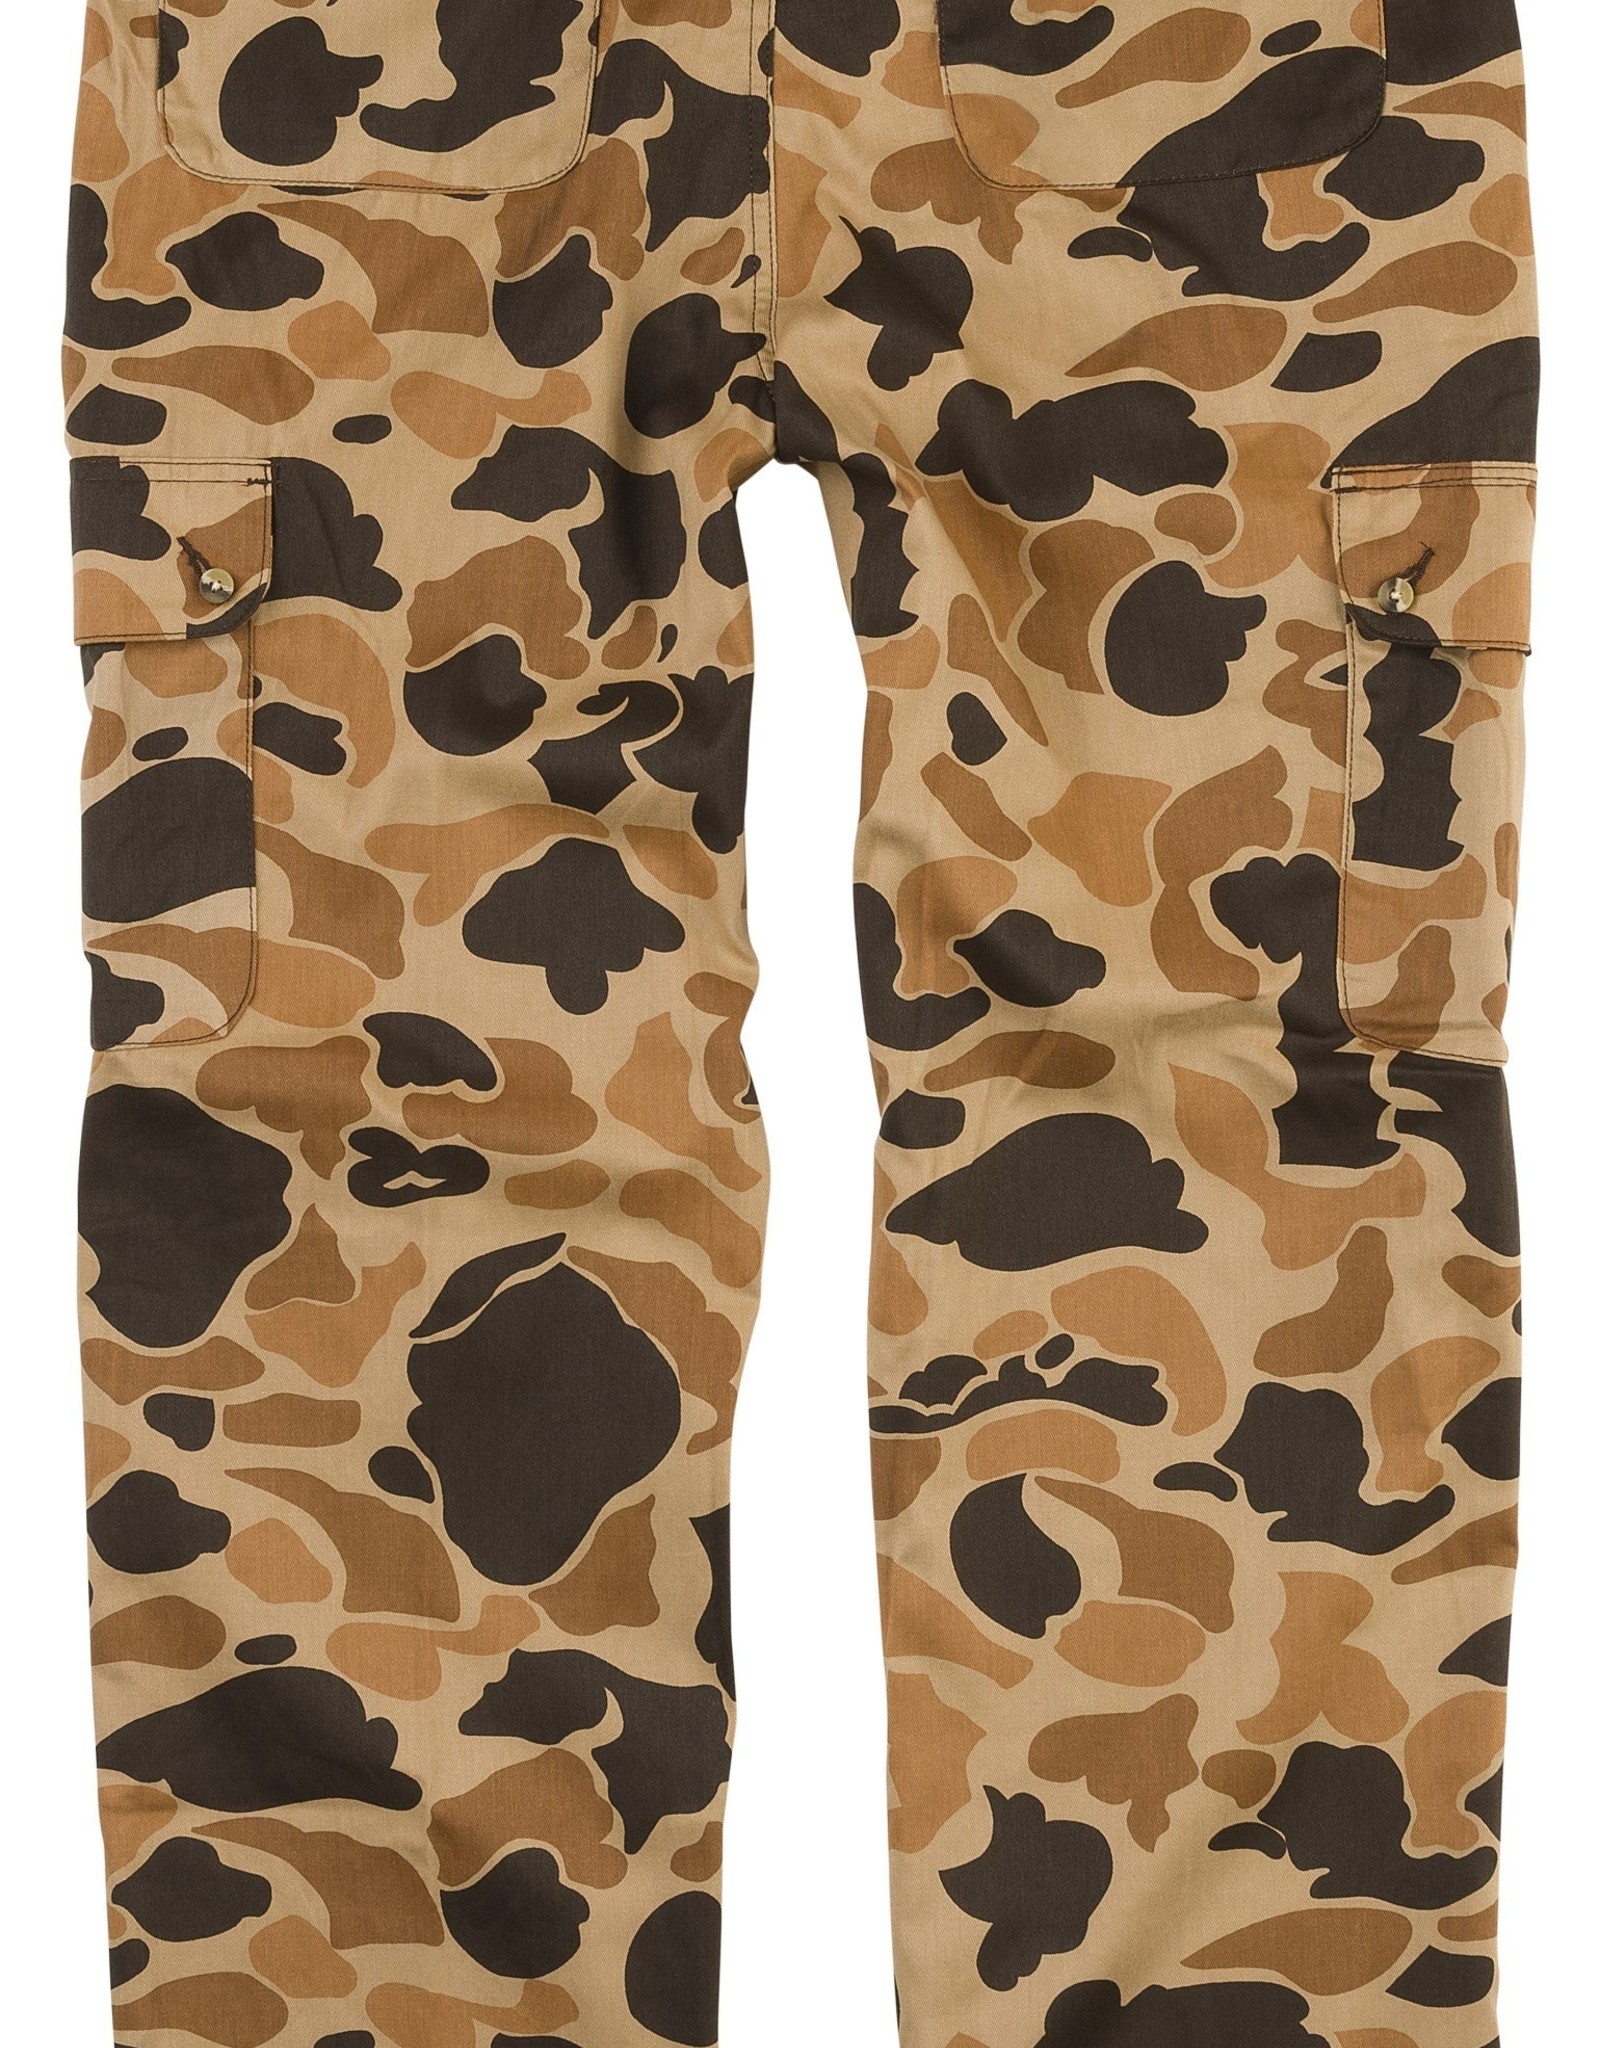 Browning Wasatch Pants